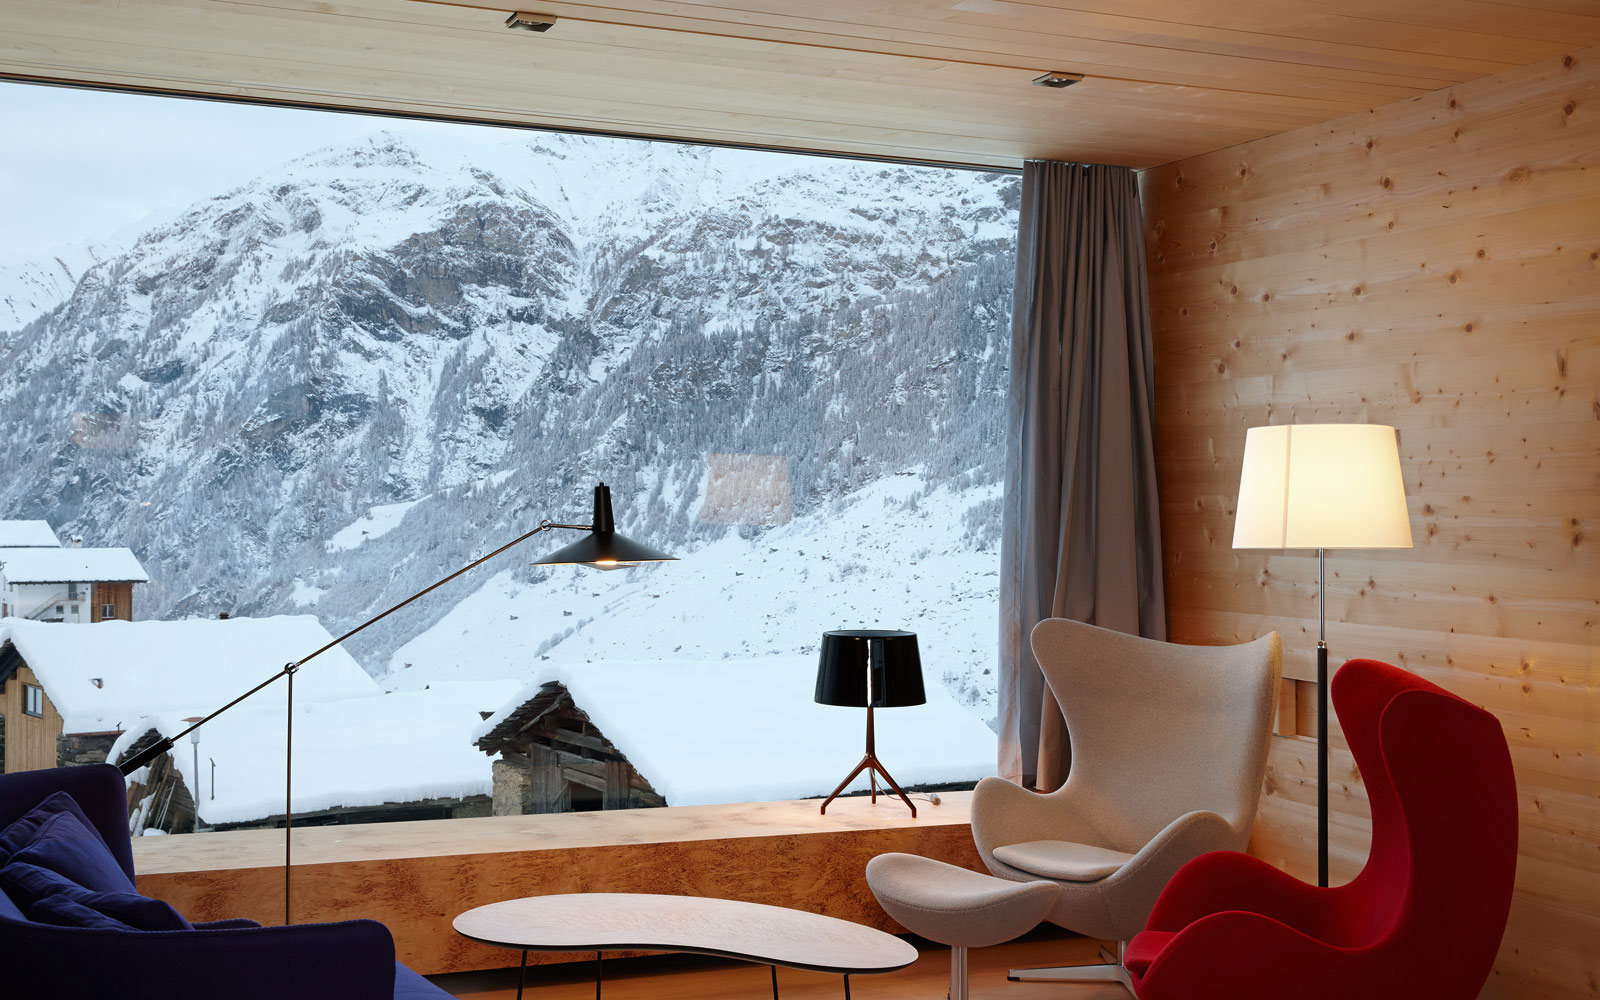 Living Room Zumthor Impressive Living Room Design Of Zumthor Vacation Homes With Colorful Chair And Glass Window With Snow Mountain Scenery House Designs  Simple Wooden Interior From Zumthor Vacation Home 